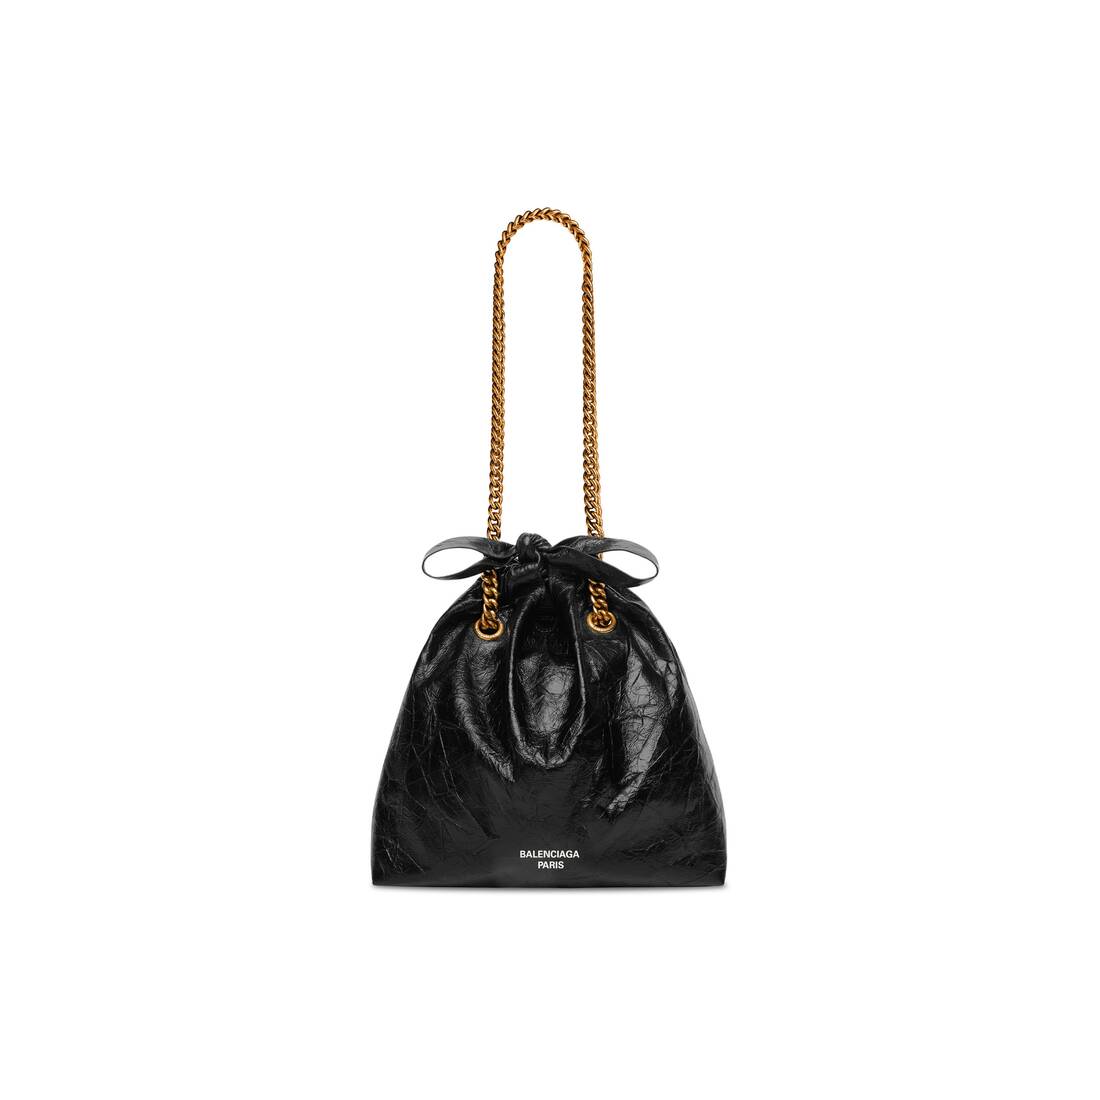 Women's Fashionable Bucket Bag with Chain Strap Shoulder Bag,one-size